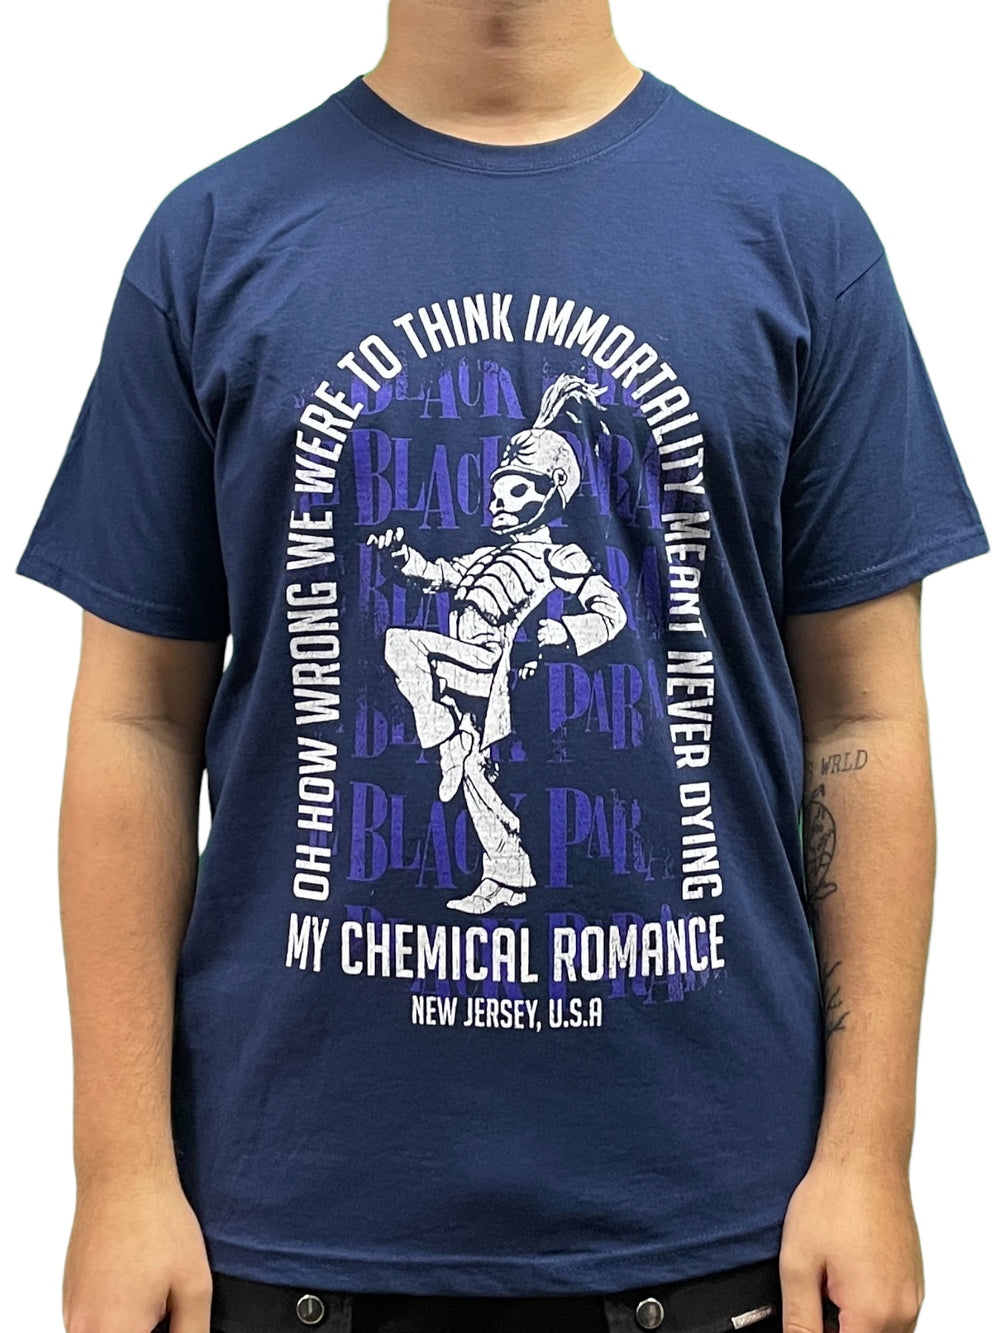 My Chemical Romance - Immortality Official Unisex T Shirt Various Sizes NEW